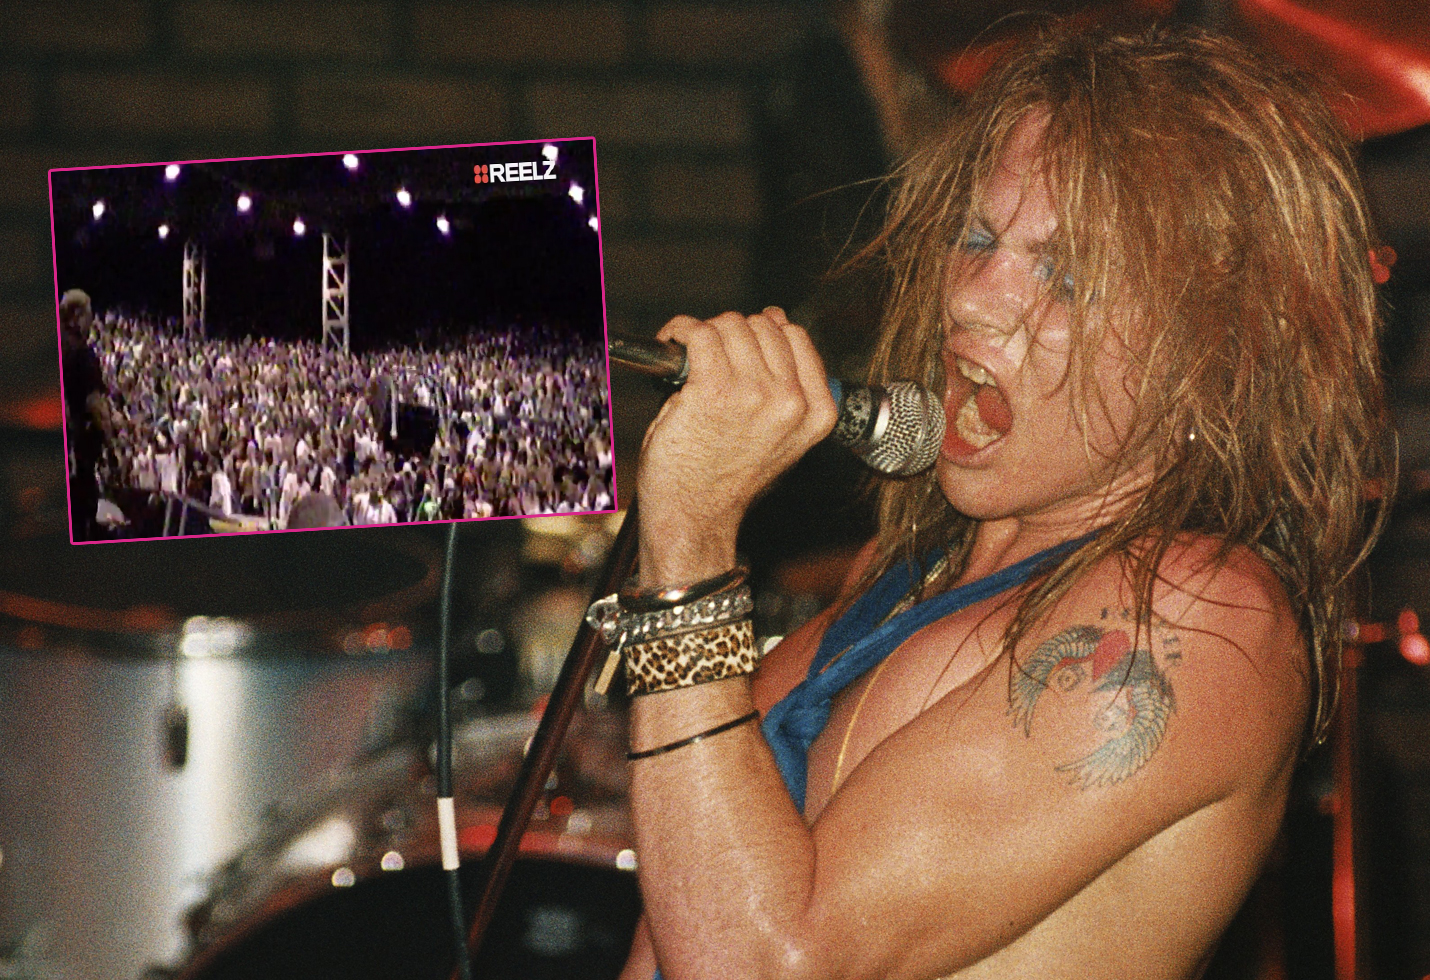 Axl Rose grips a microphone while wearing no shirt and sporting a blue scarf.